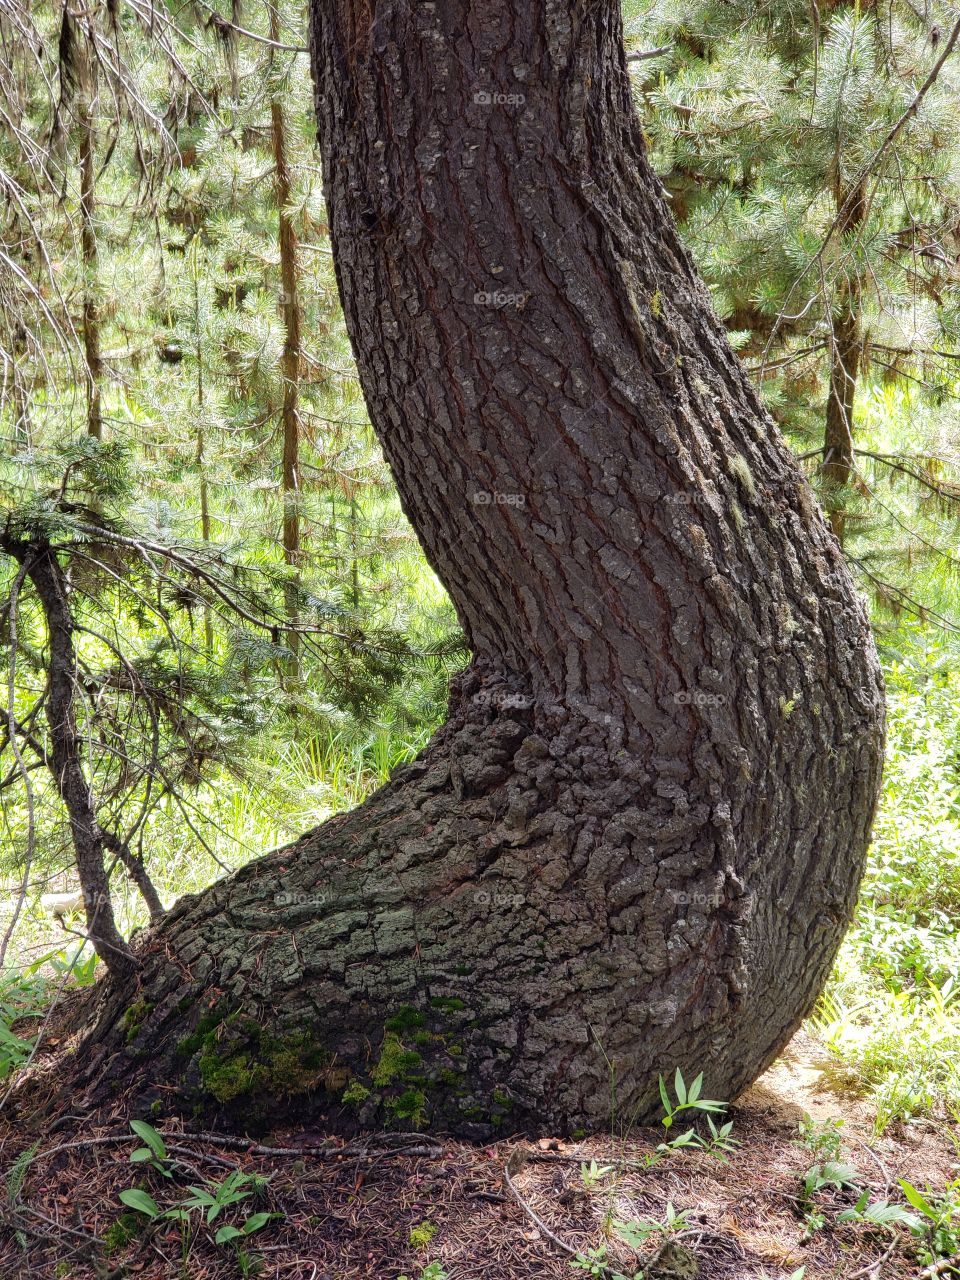 Close- up of a unique tree curved at the bottom from weather endured when it was young.